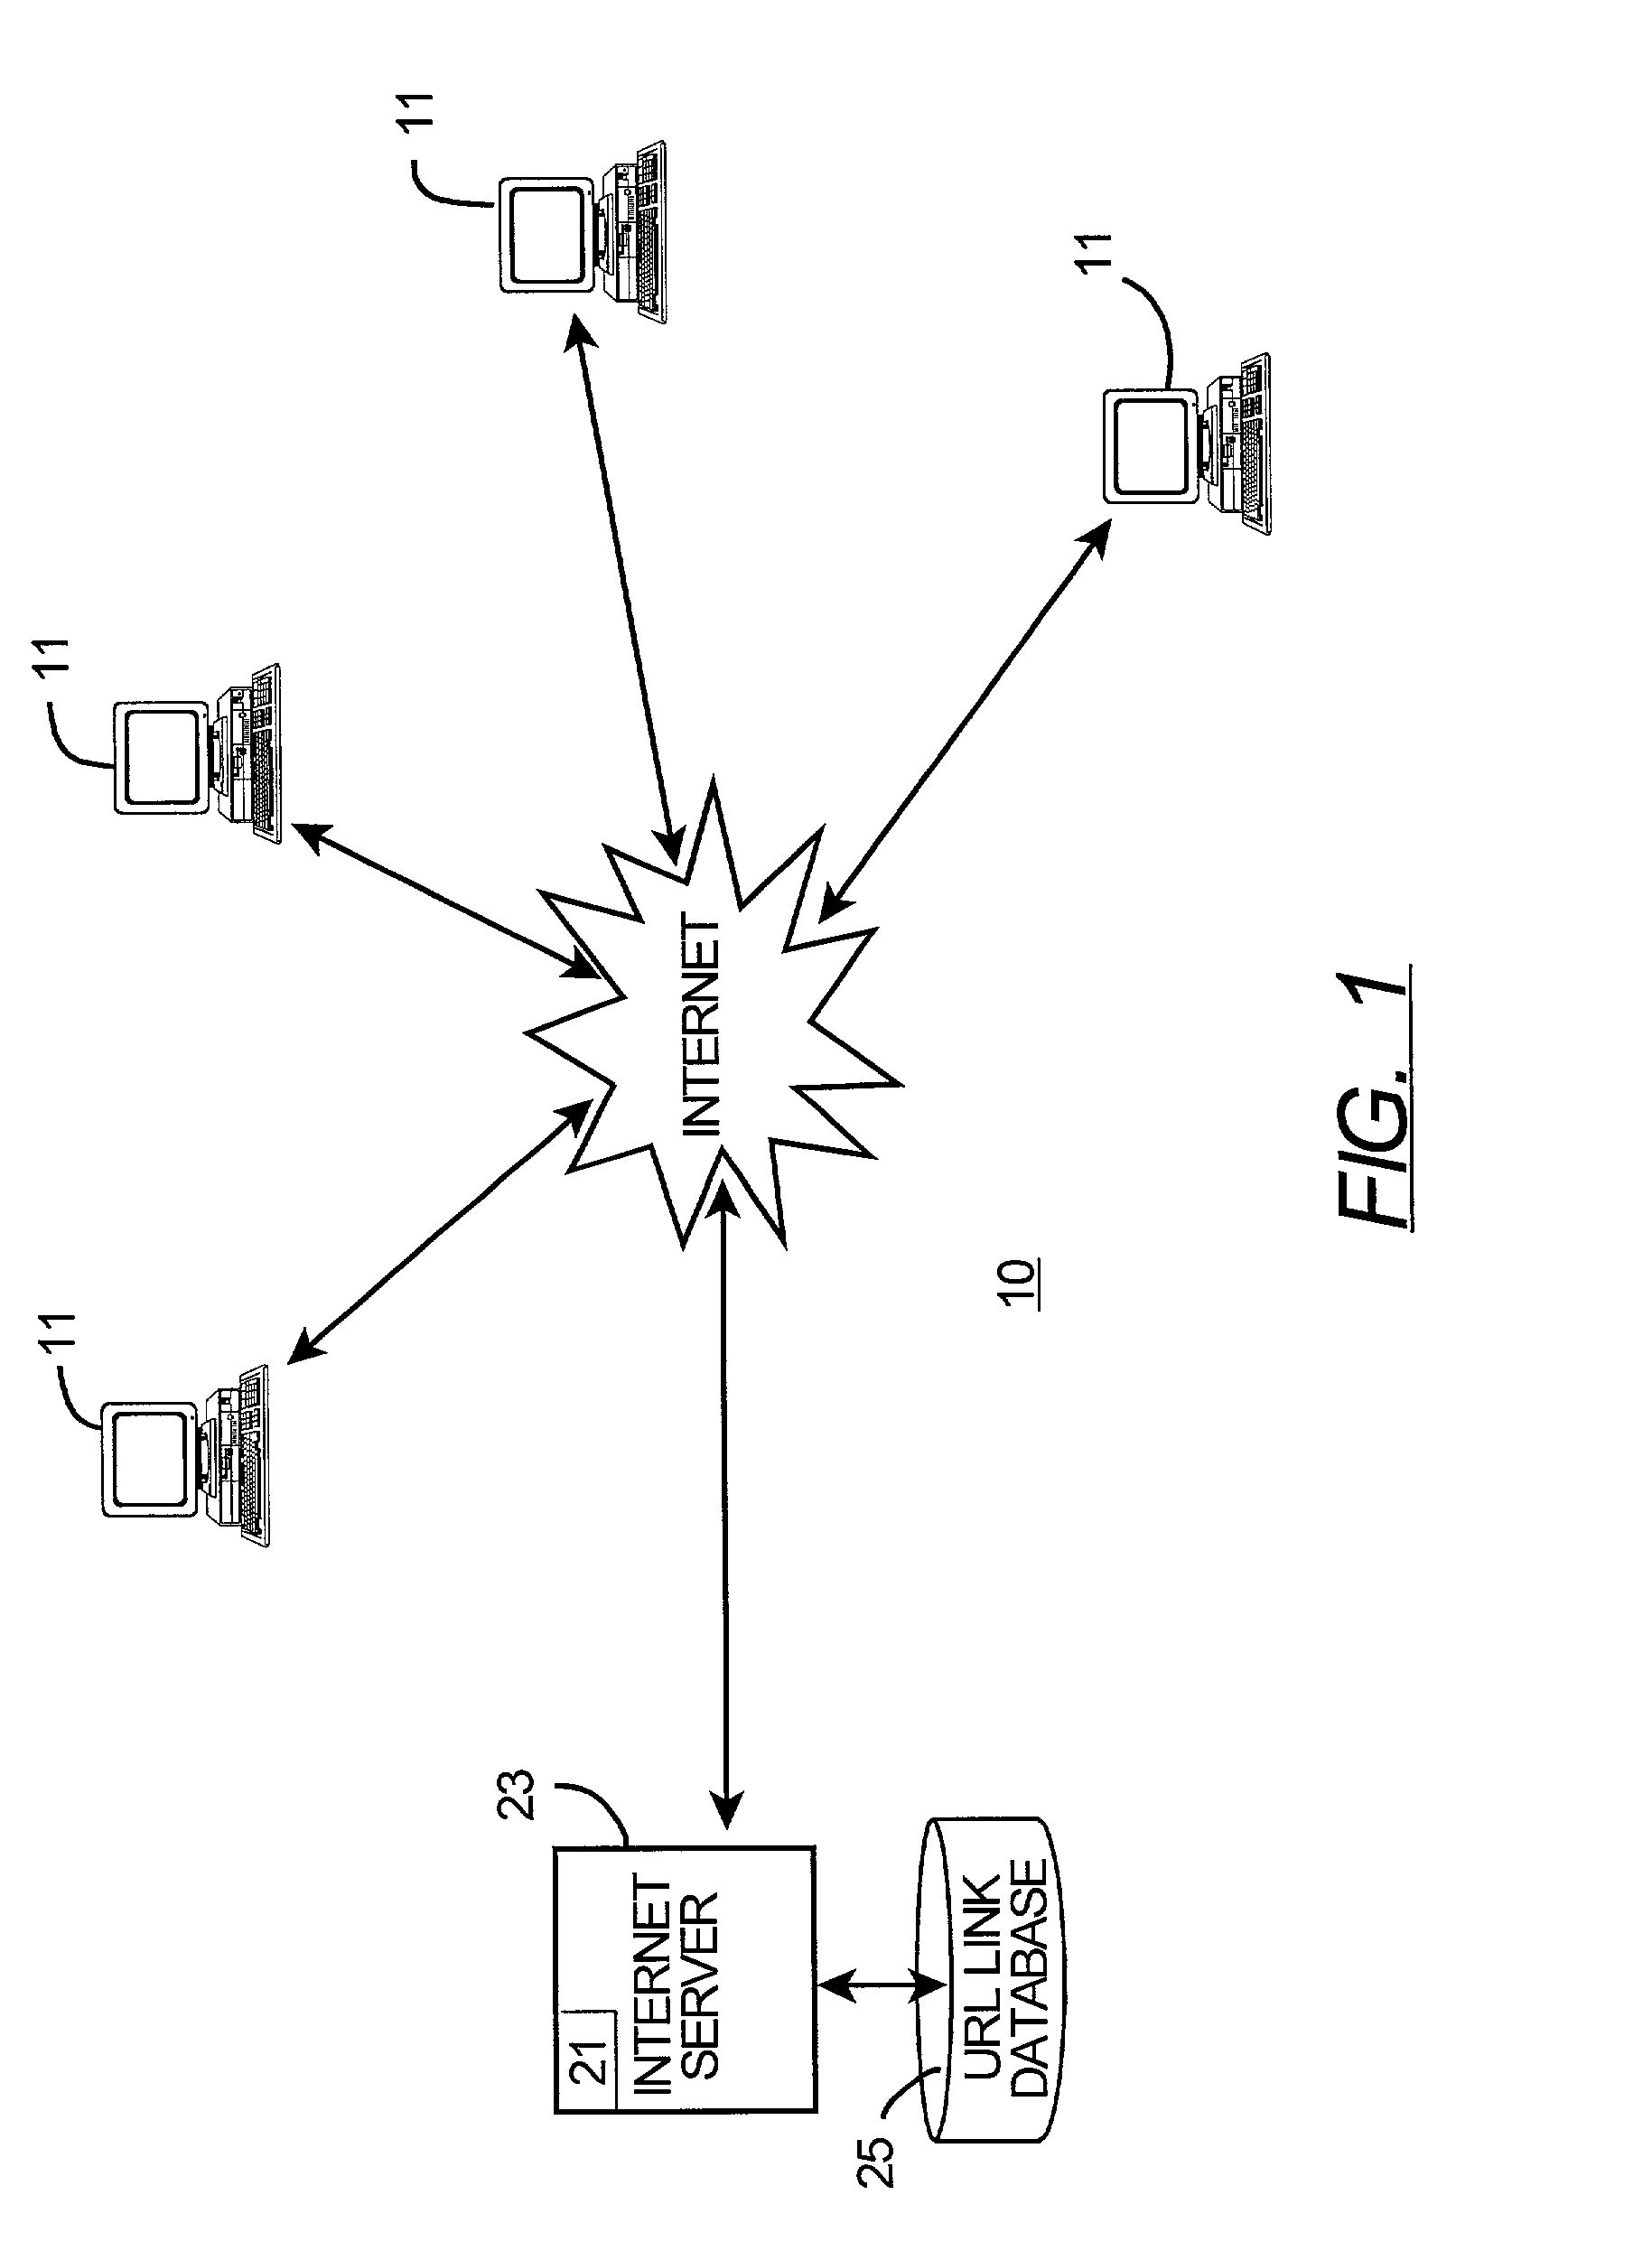 Web-based system and method for engineering project design